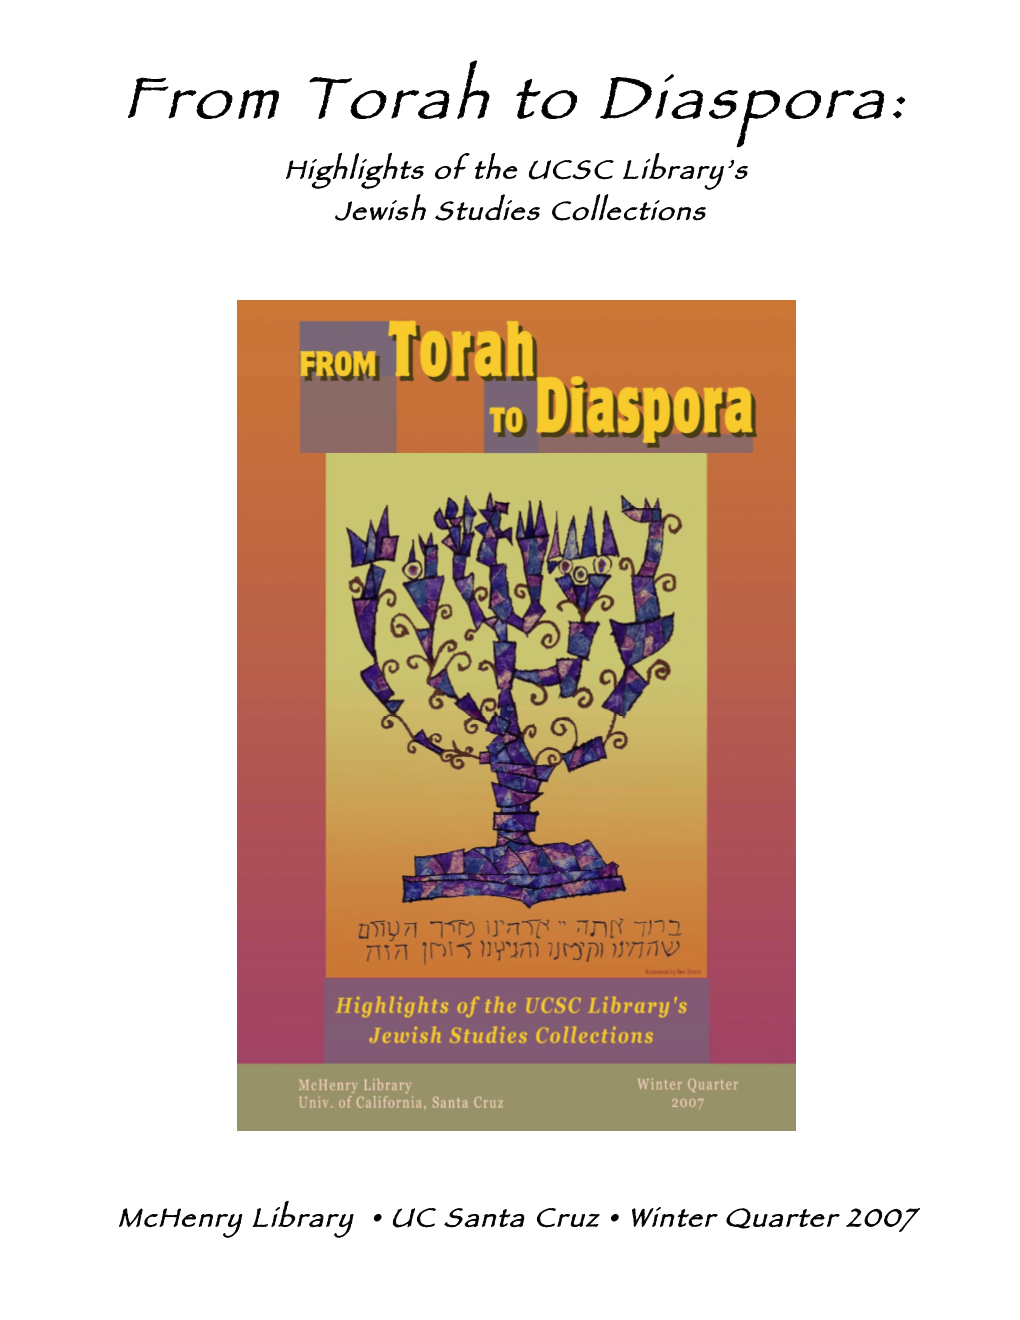 From Torah to Diaspora: Highlights of the UCSC Library’S Jewish Studies Collections